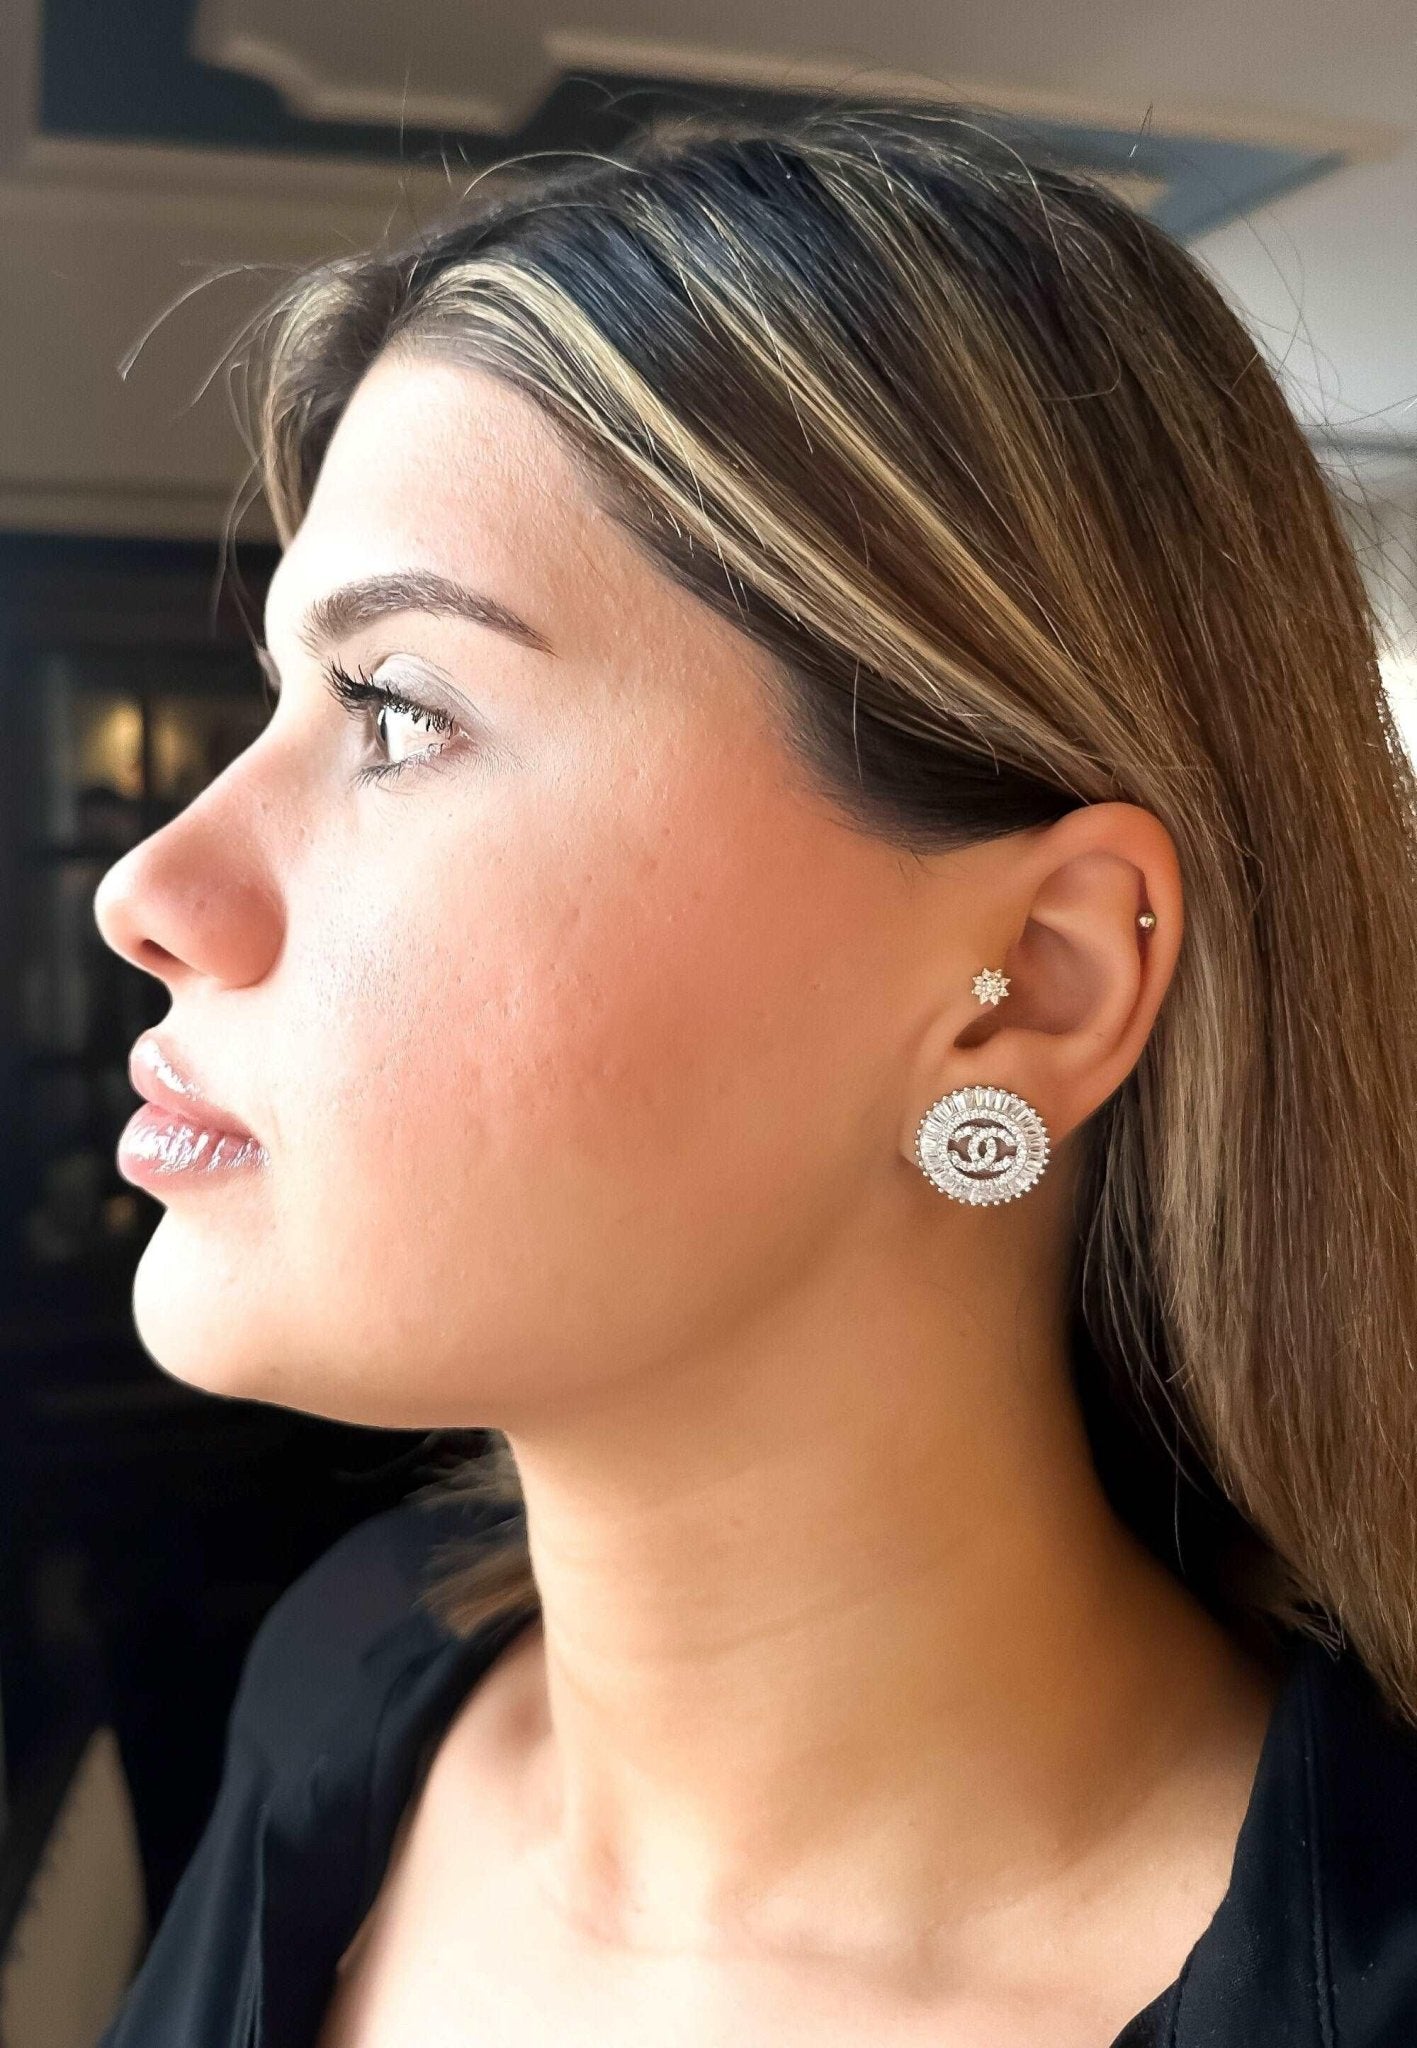 Chanel Vintage Hammered CC Stud Earrings | Rent Chanel jewelry for $55/month